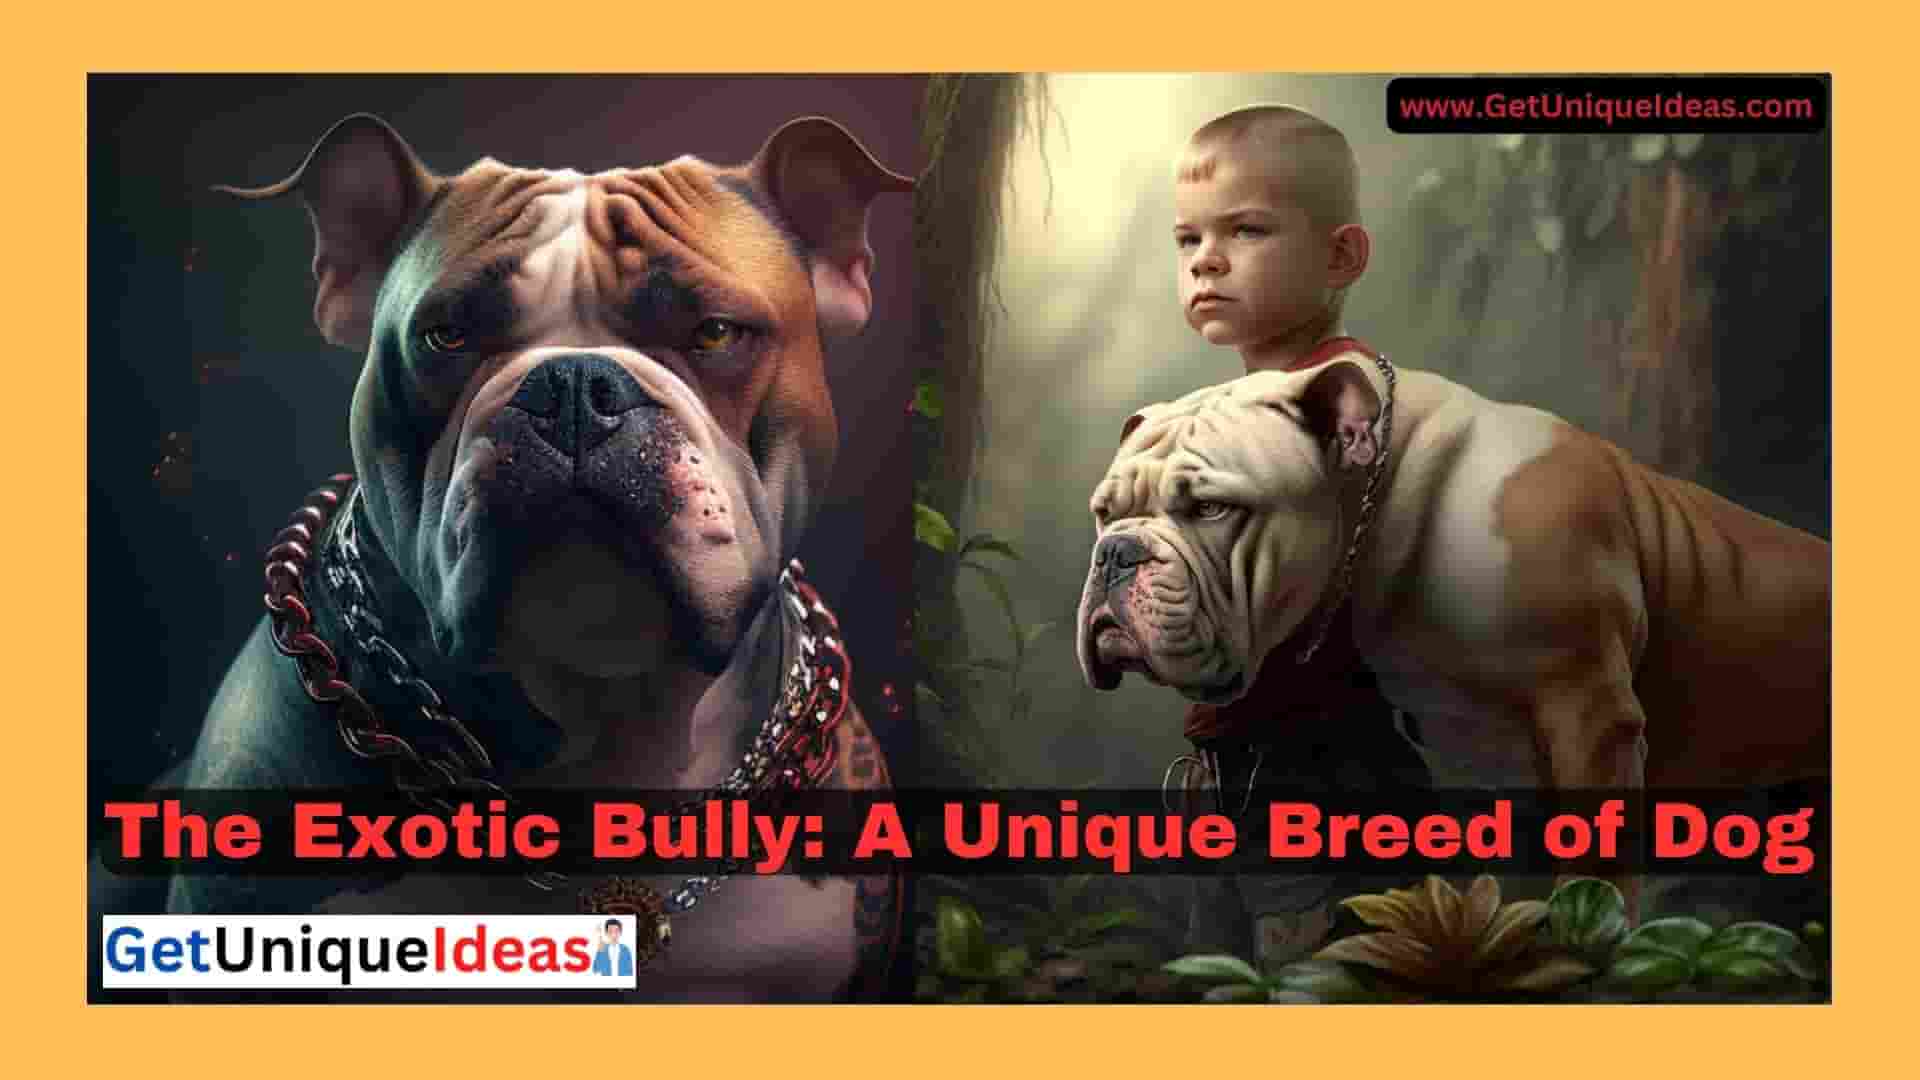 What is an Exotic Bully?